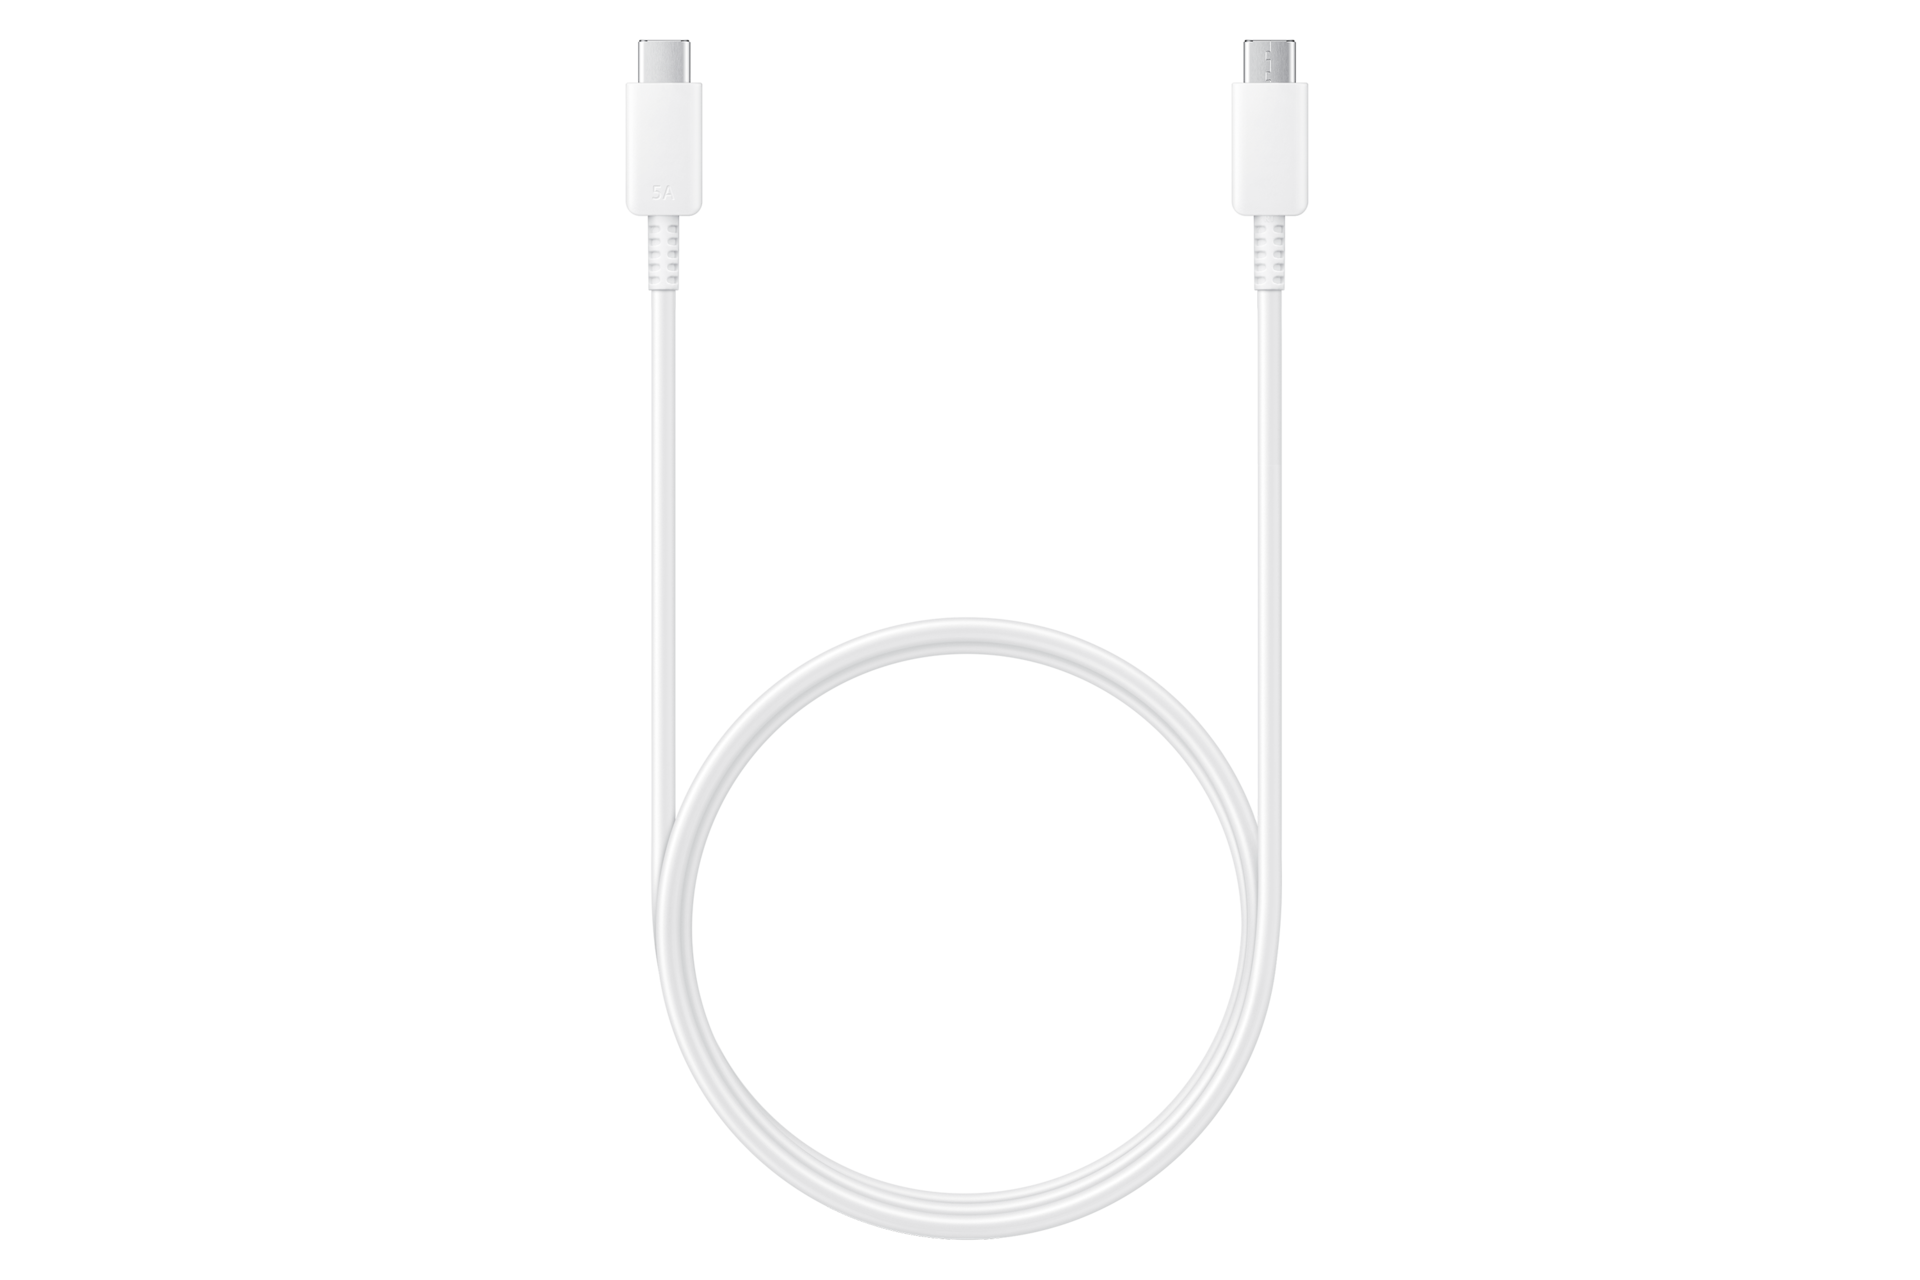 https://images.samsung.com/is/image/samsung/hk-en-5a-usb-c-to-usb-c-cable-1m-ep-dn975bwegww-frontwhite-182871568?$650_519_PNG$